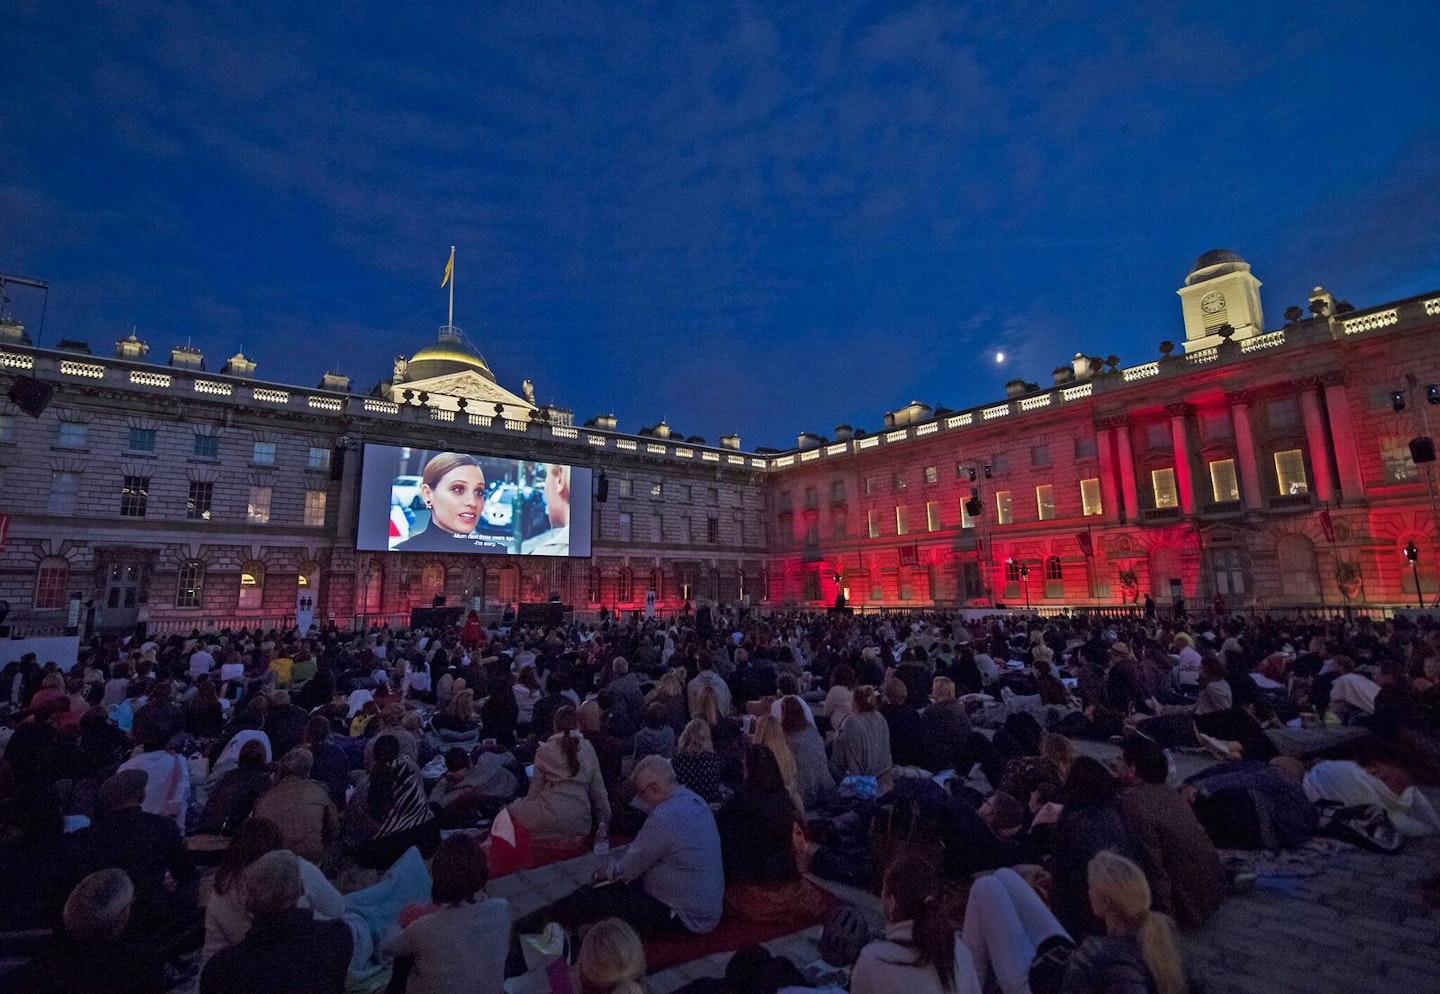 Outdoor cinema at Somerset House, London